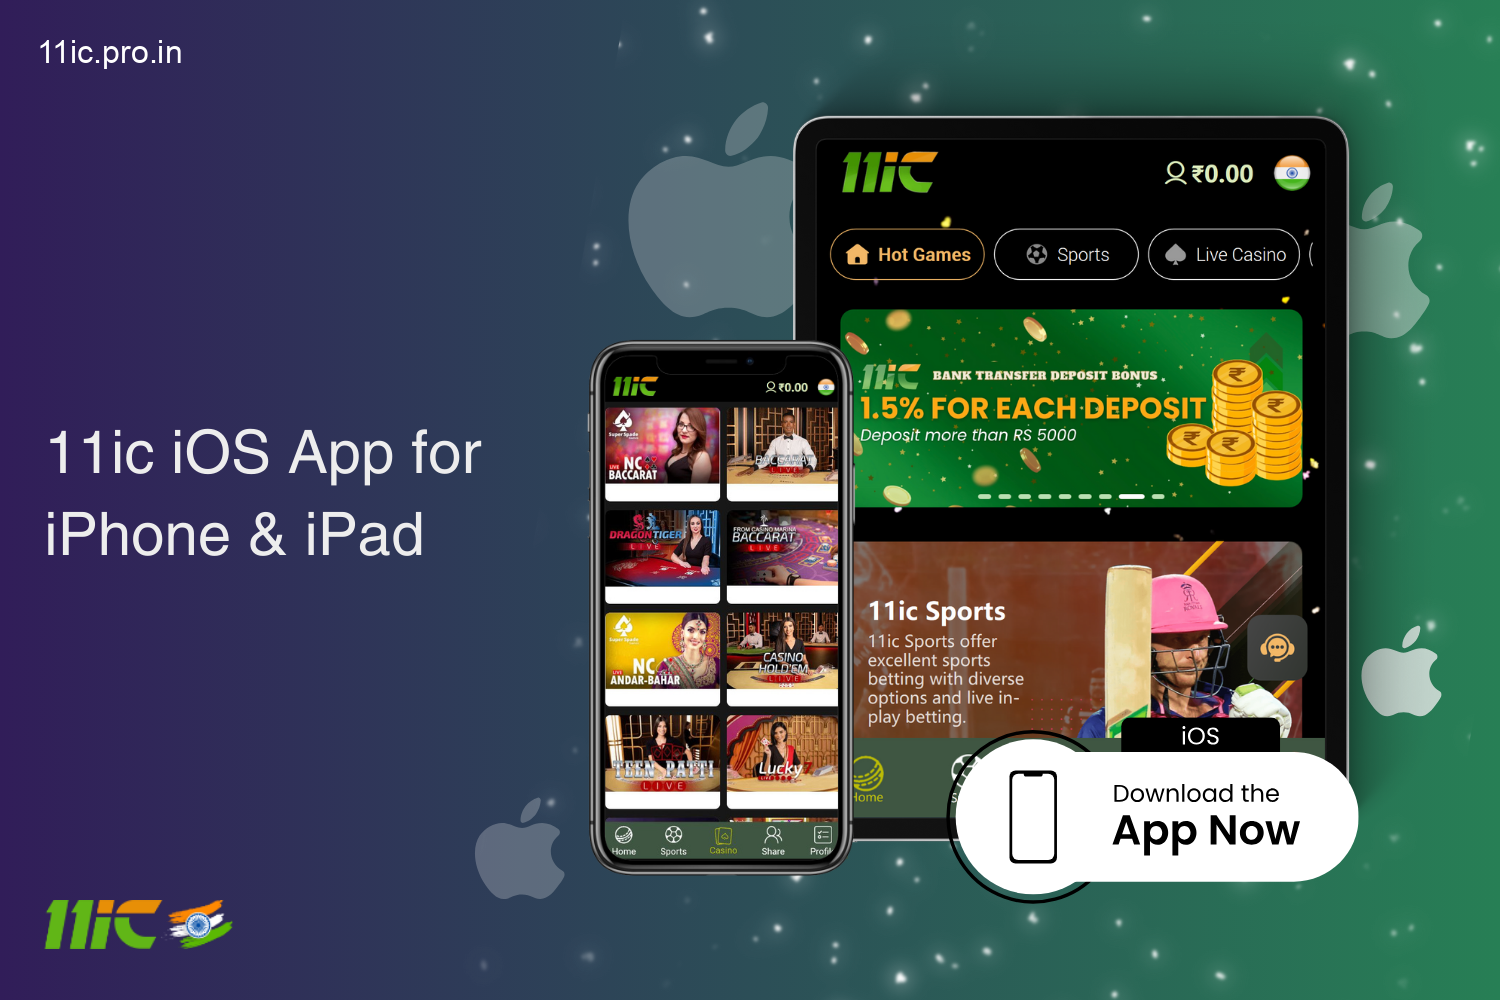 The 11ic mobile app is available for iPhone and iPad